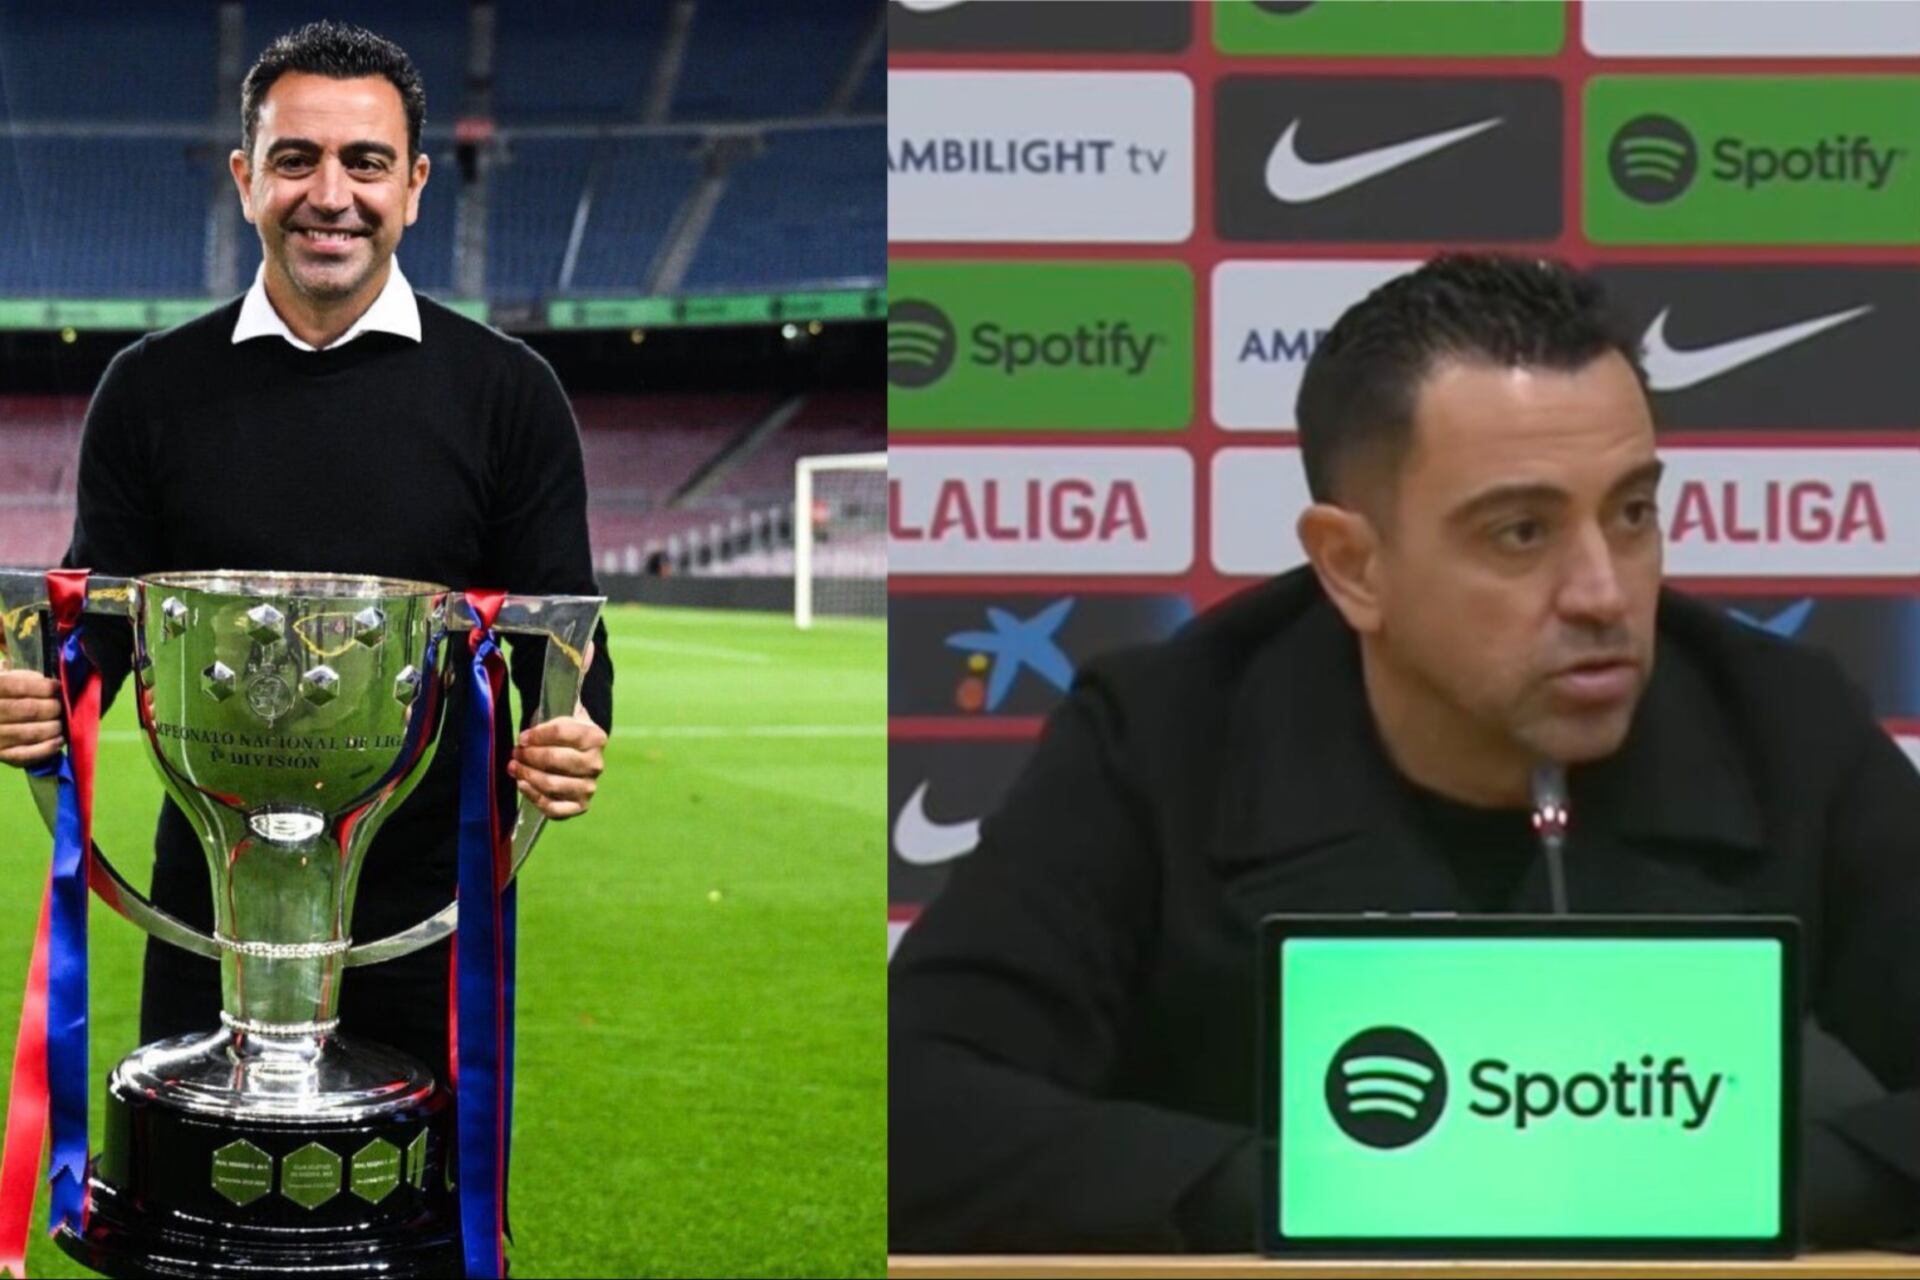 Despite being in FC Barcelona, he will not replace Xavi as the new Barca coach